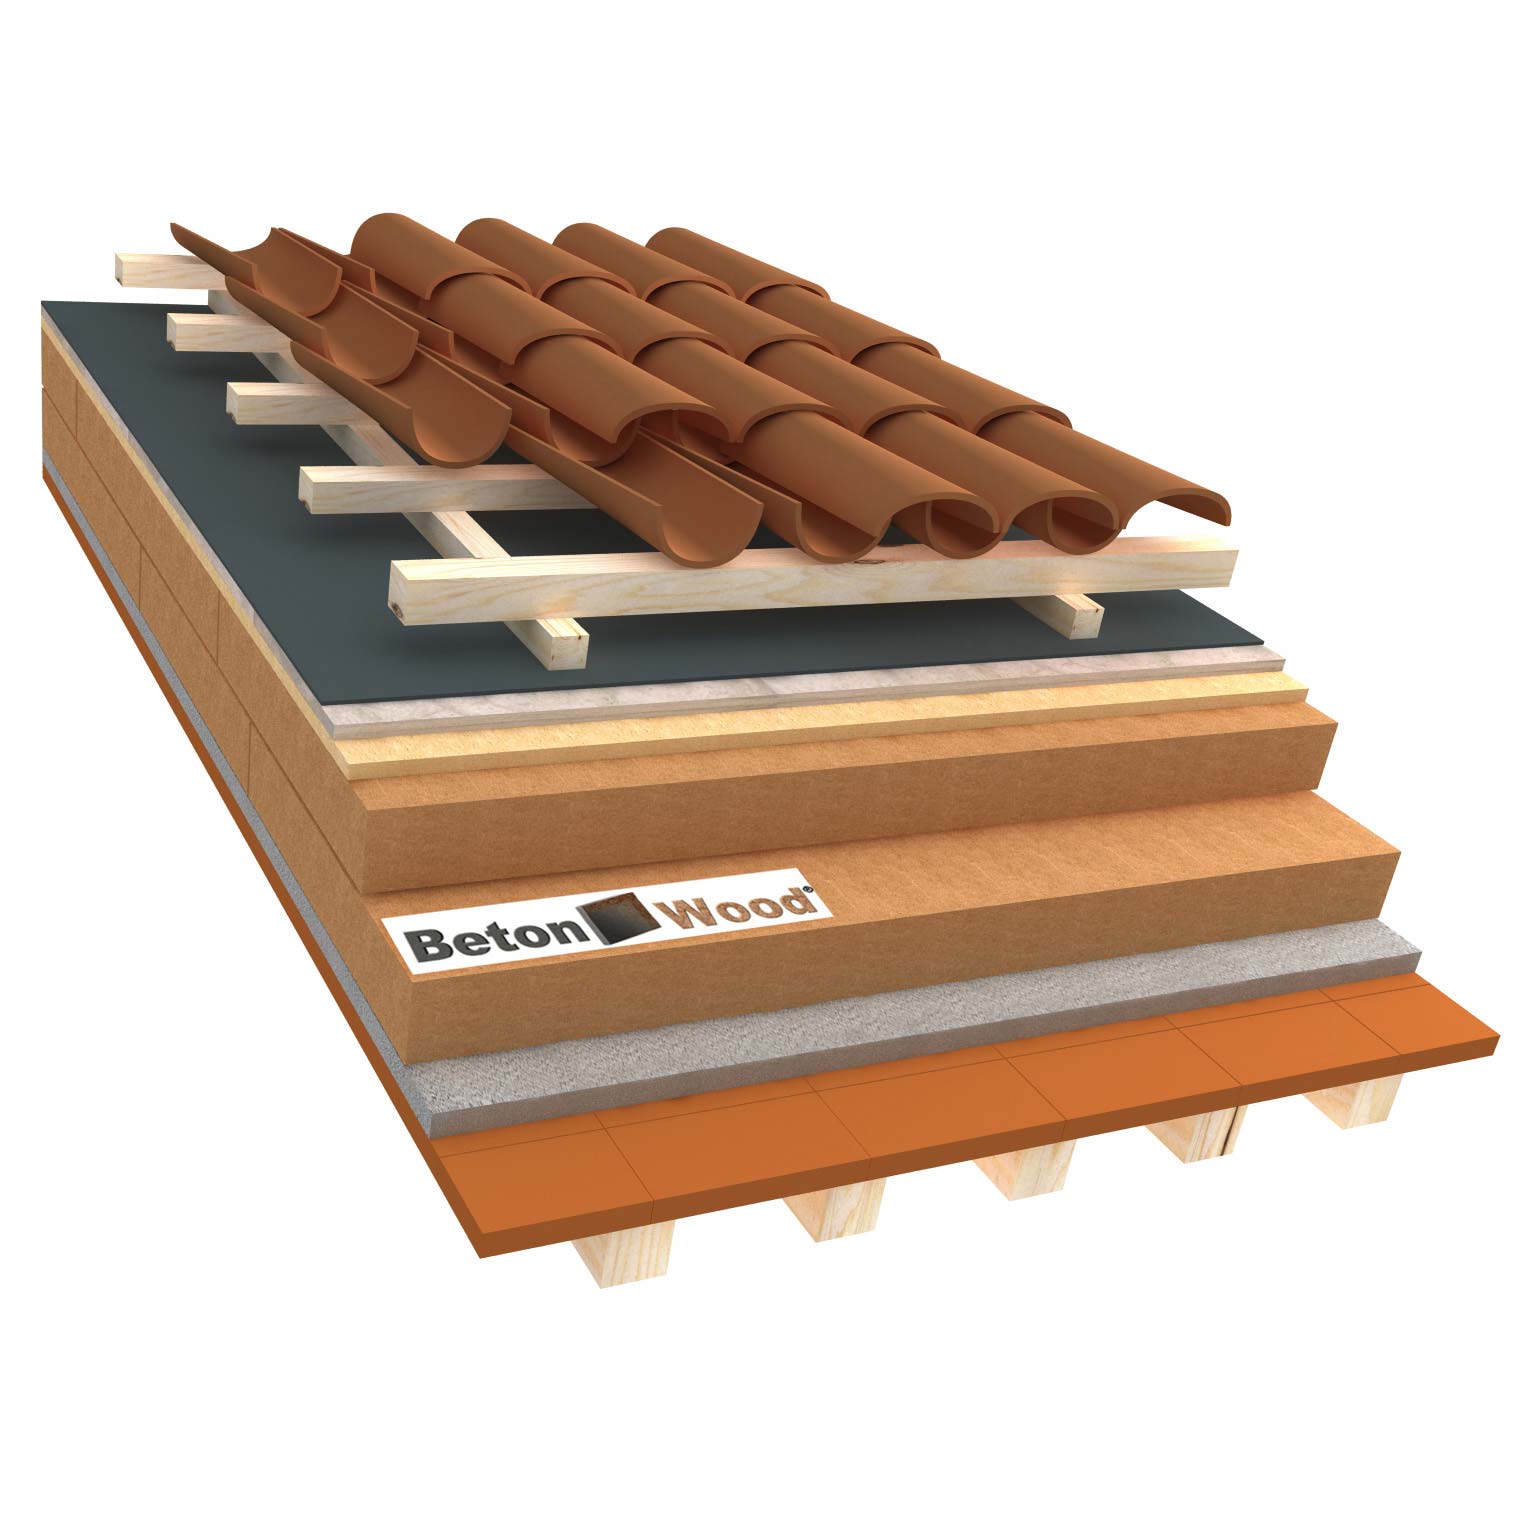 Ventilated roof with wood fiber Isorel, Universal and cement bonded particle boards on terracotta tiles